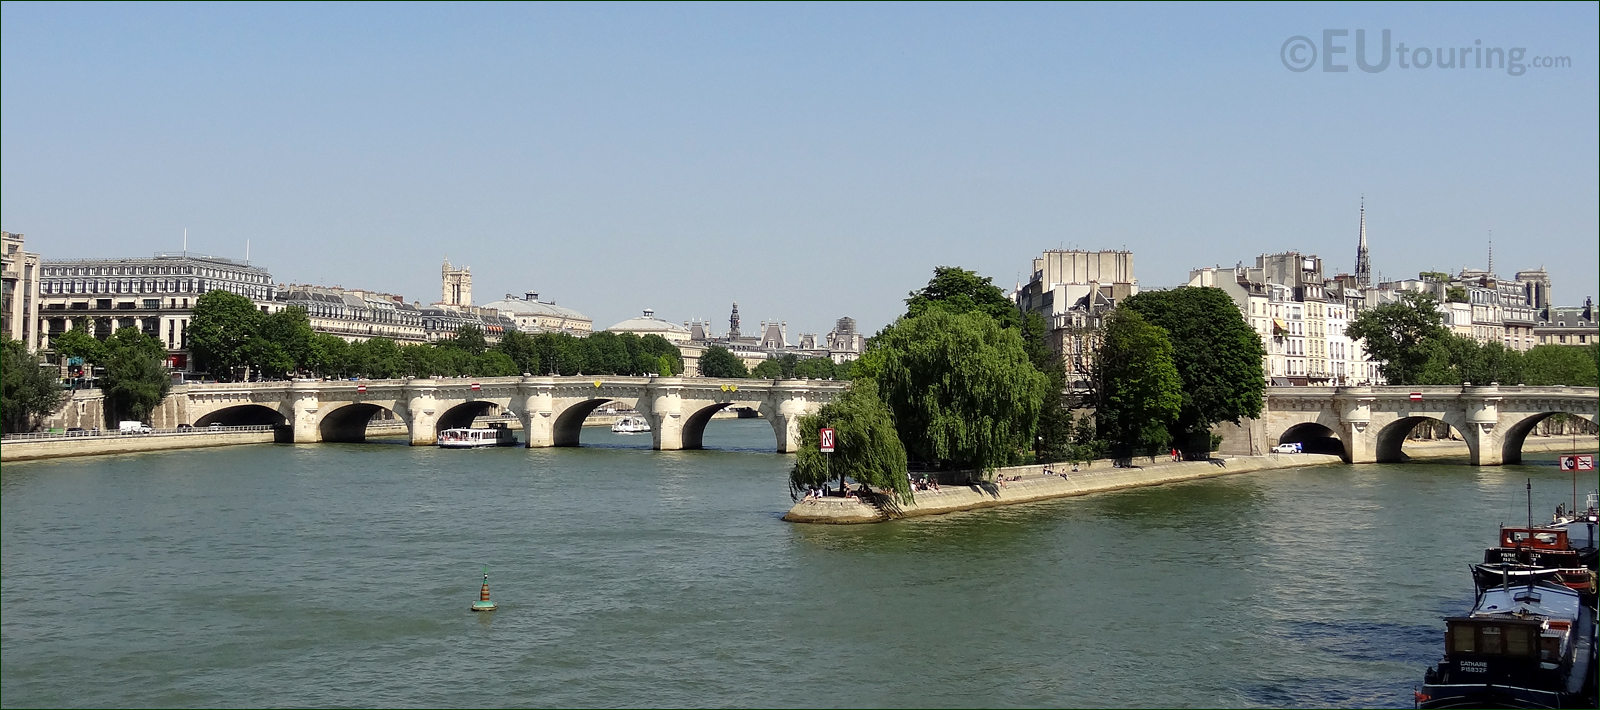 Pont-Neuf links the Ile de la Cite to the Right and Left Banks